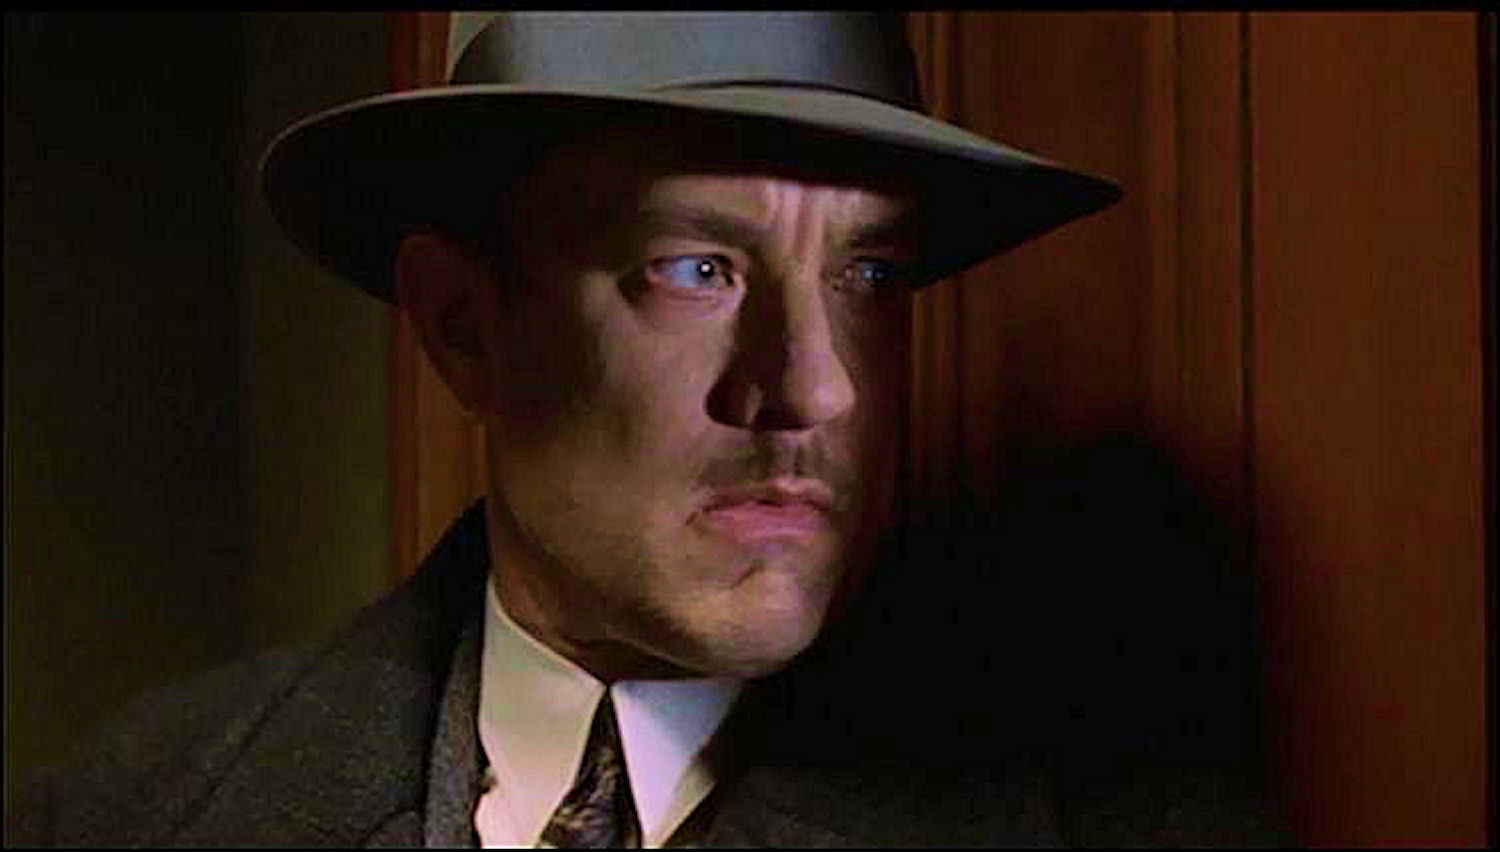 2002 Road To Perdition